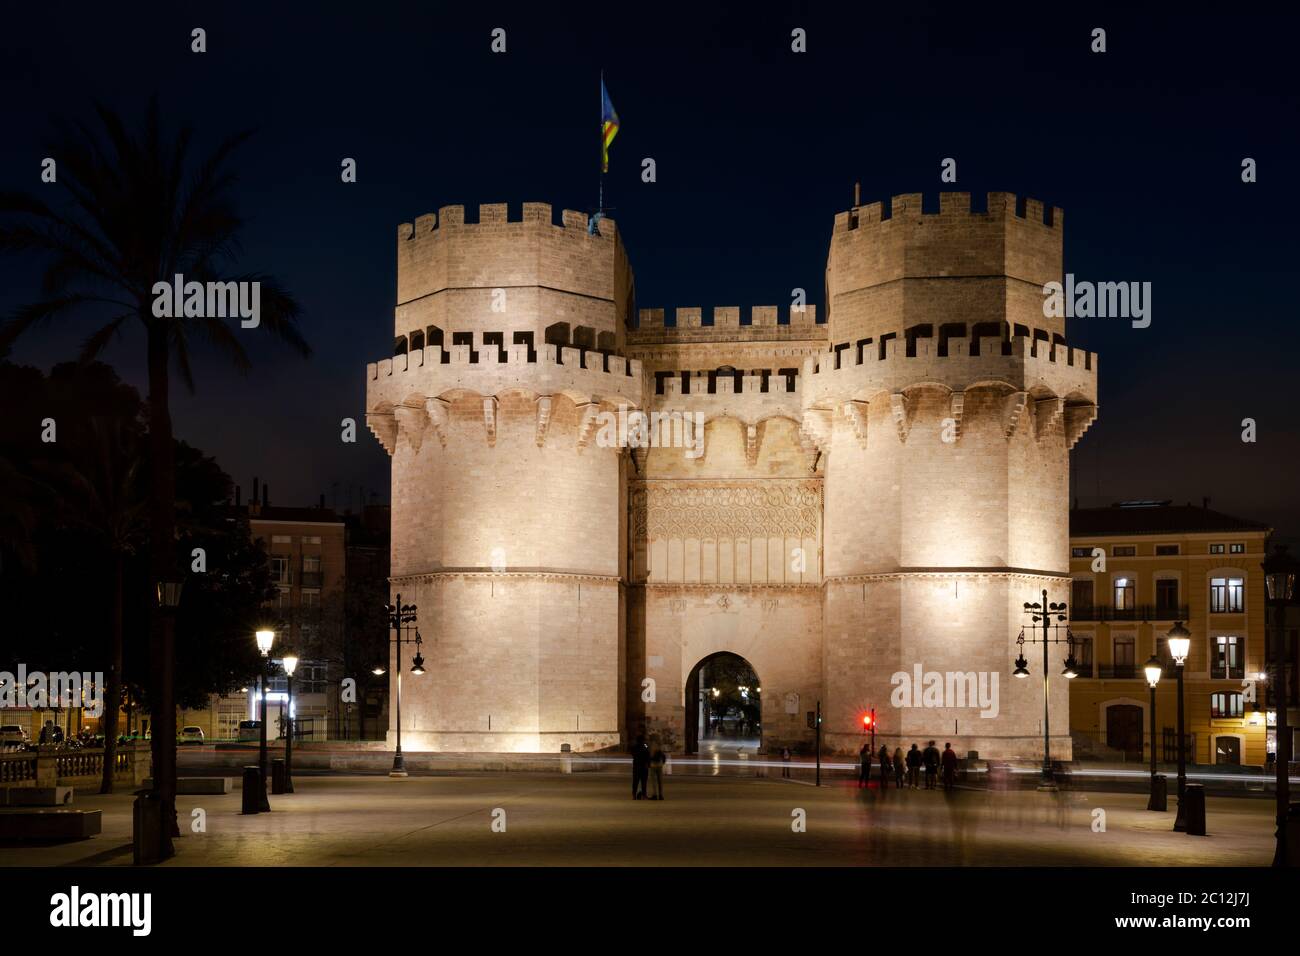 Serrano Towers lit up at night one of the gates of the original medieval city wall, Valencia, Spain. Stock Photo